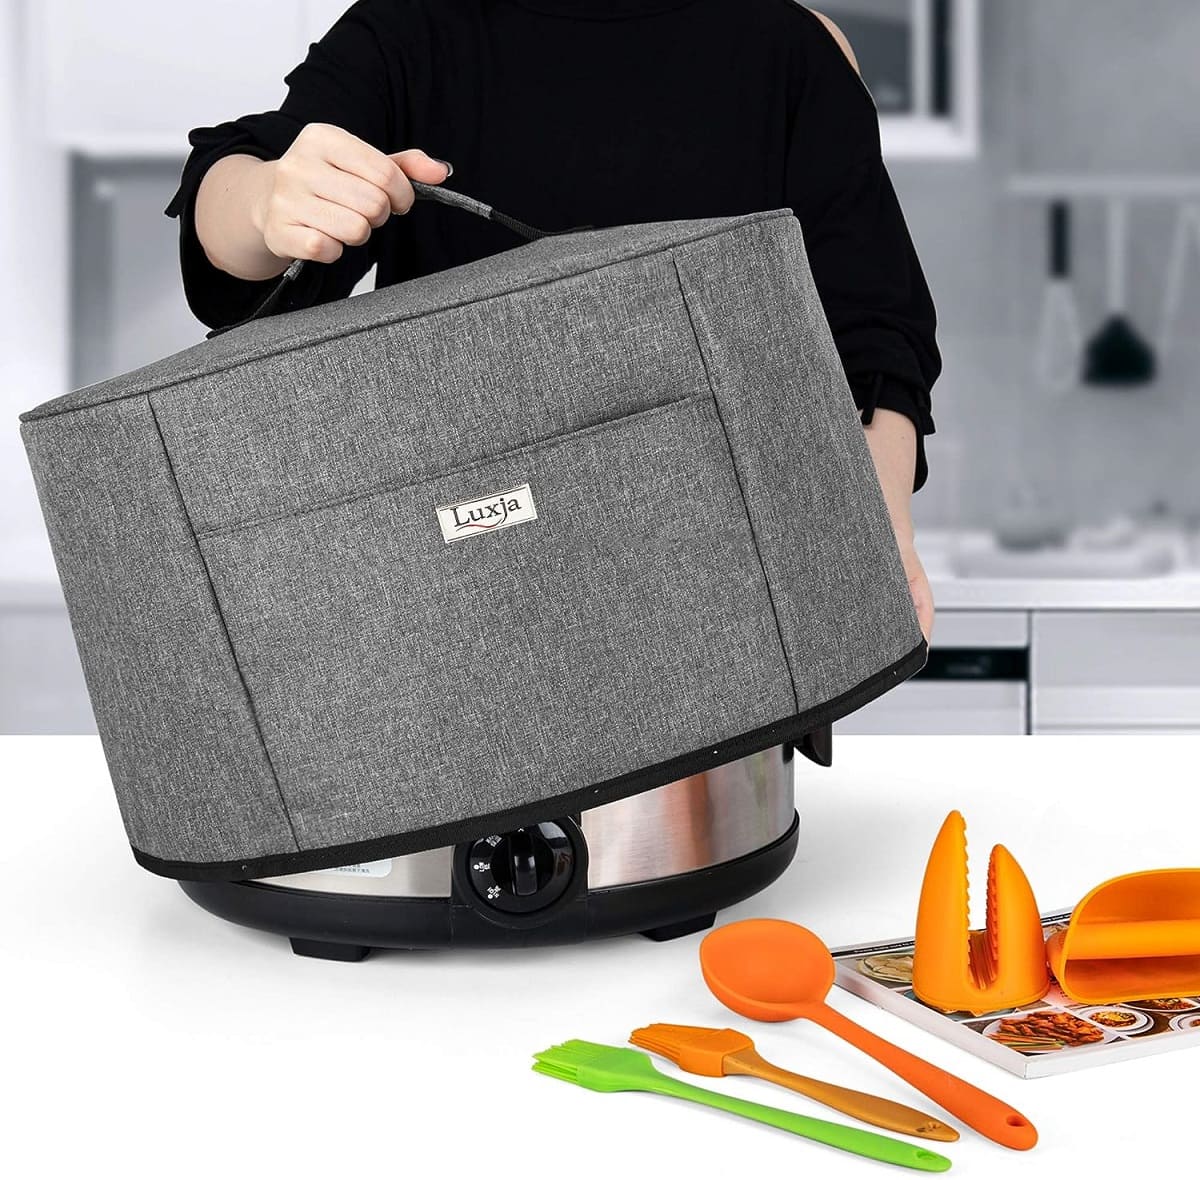 HOMEST 2 Compartments Carry Bag for 8 Quart Instant Pot, Pressure Cooker  Travel Tote Bag Have Accessory Pockets for Spoon, Measuring Cup, Steam  Rack